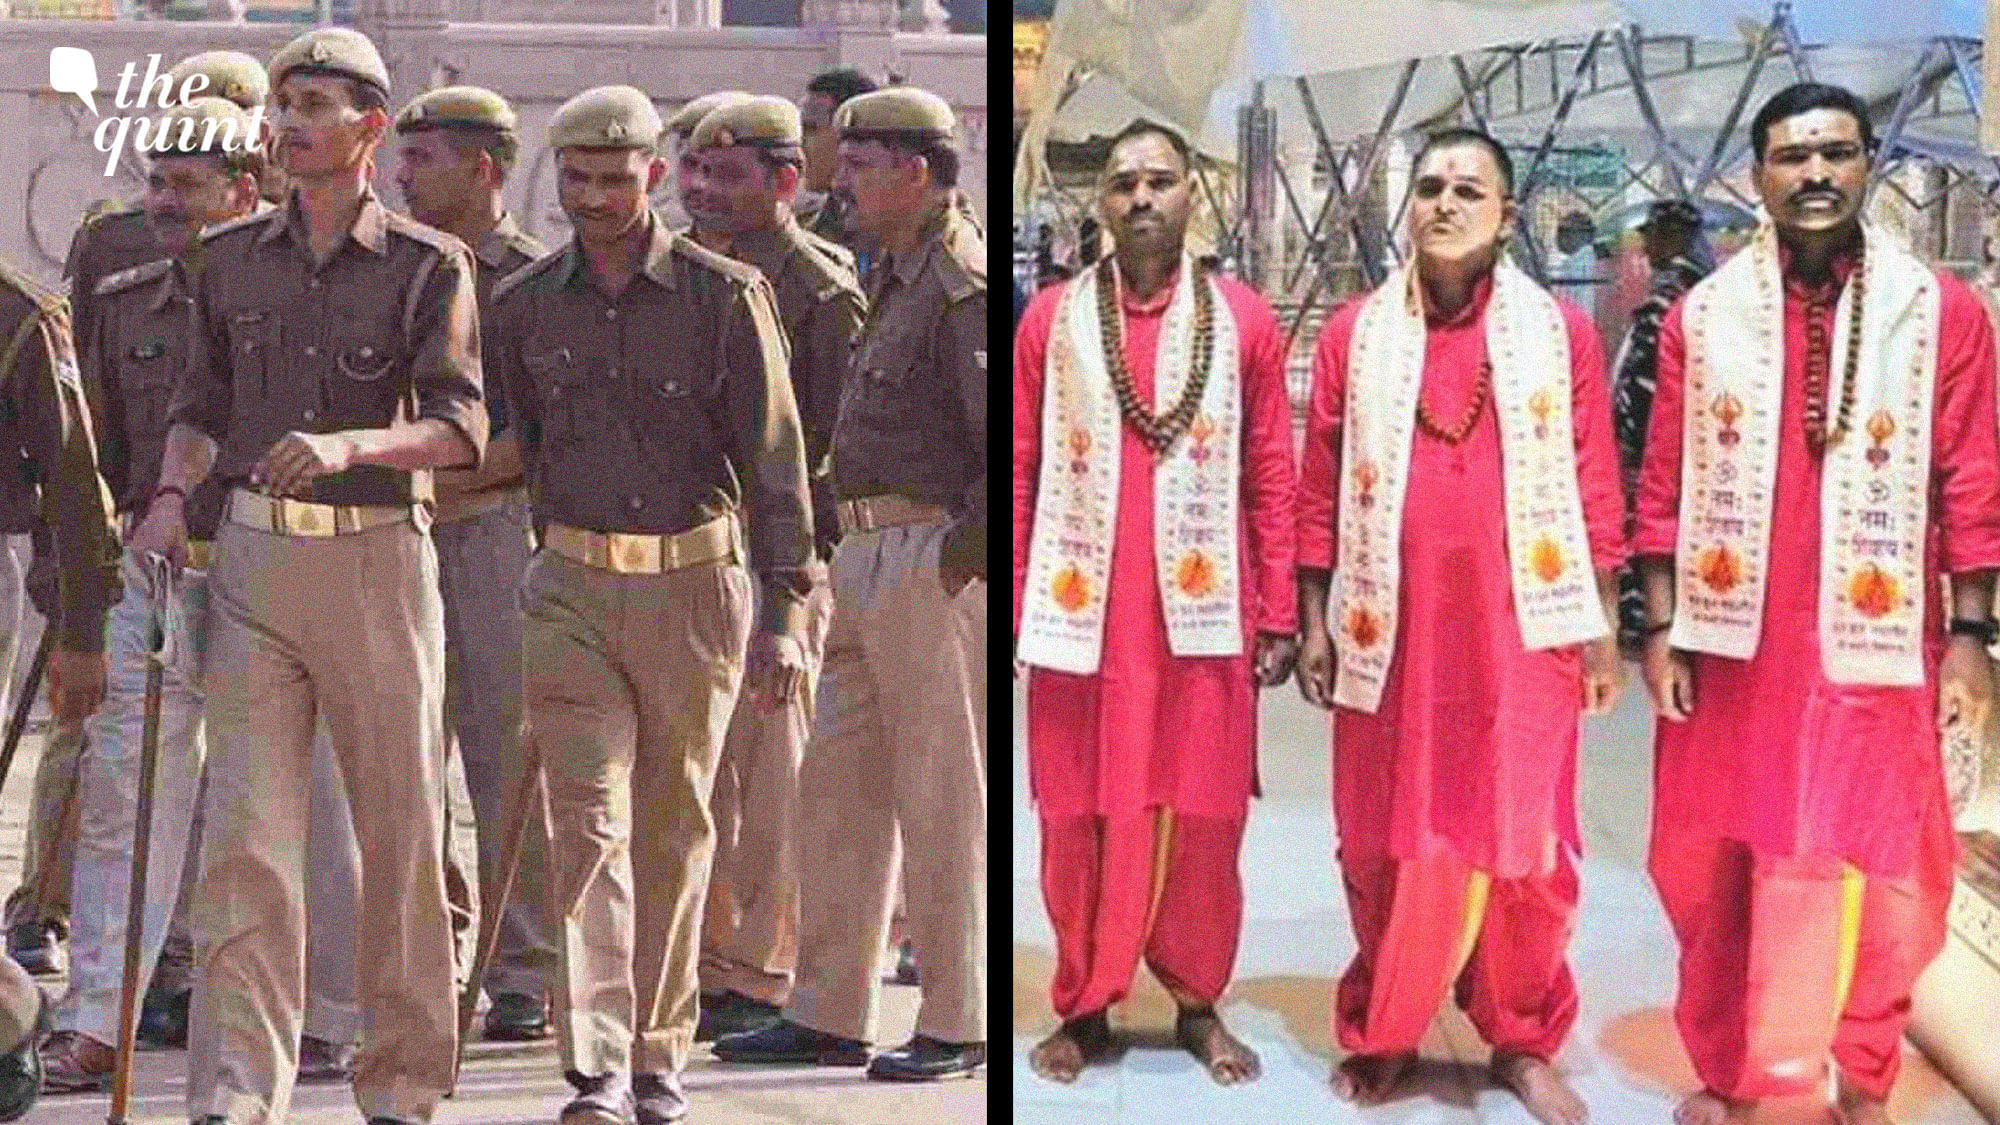 'Kurta’ Over 'Khaki’: Must Police Personnel & Armed Forces Get a Religious Spin?